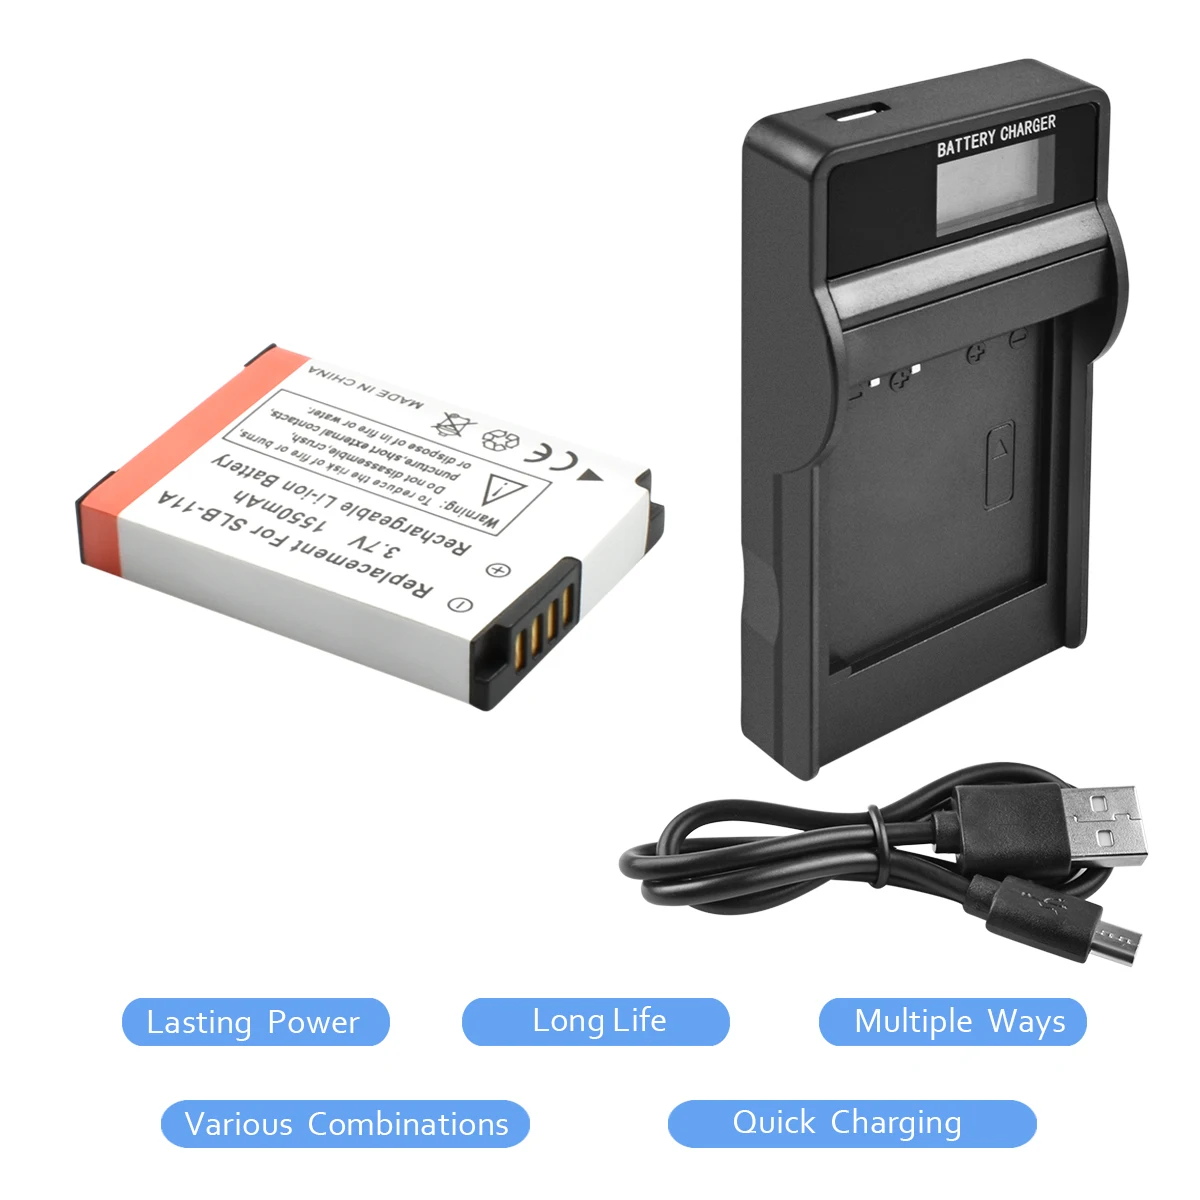 

1X 3.7V 1550mAh Li-ion SLB-11A Battery+Battery charger with LED ForSamsung WB1000 WB5000 CL65 CL80 HZ25W ST1000 ST5000 ST550 L20